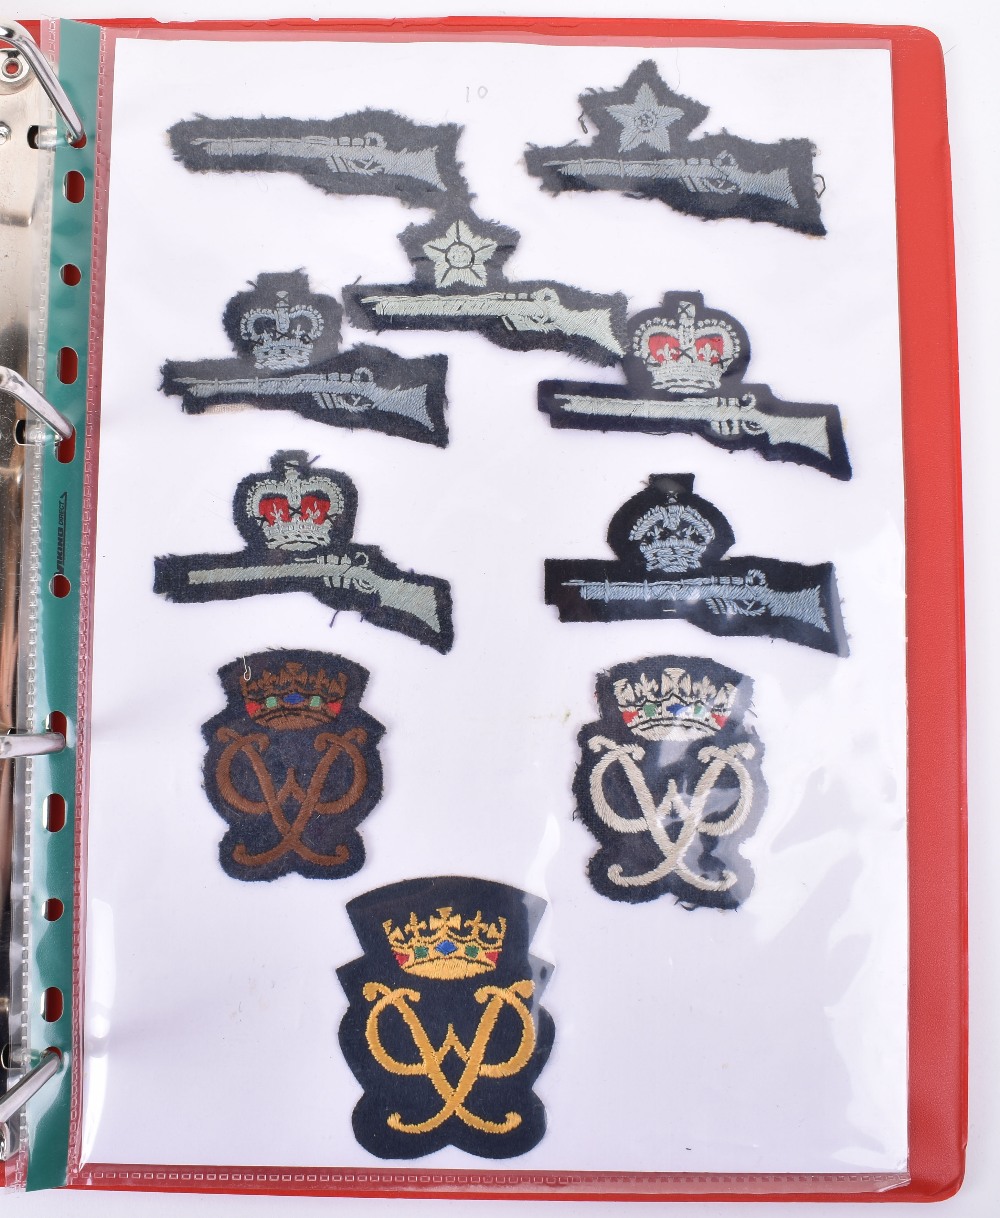 Quantity of Insignia of Royal Air Force Interest